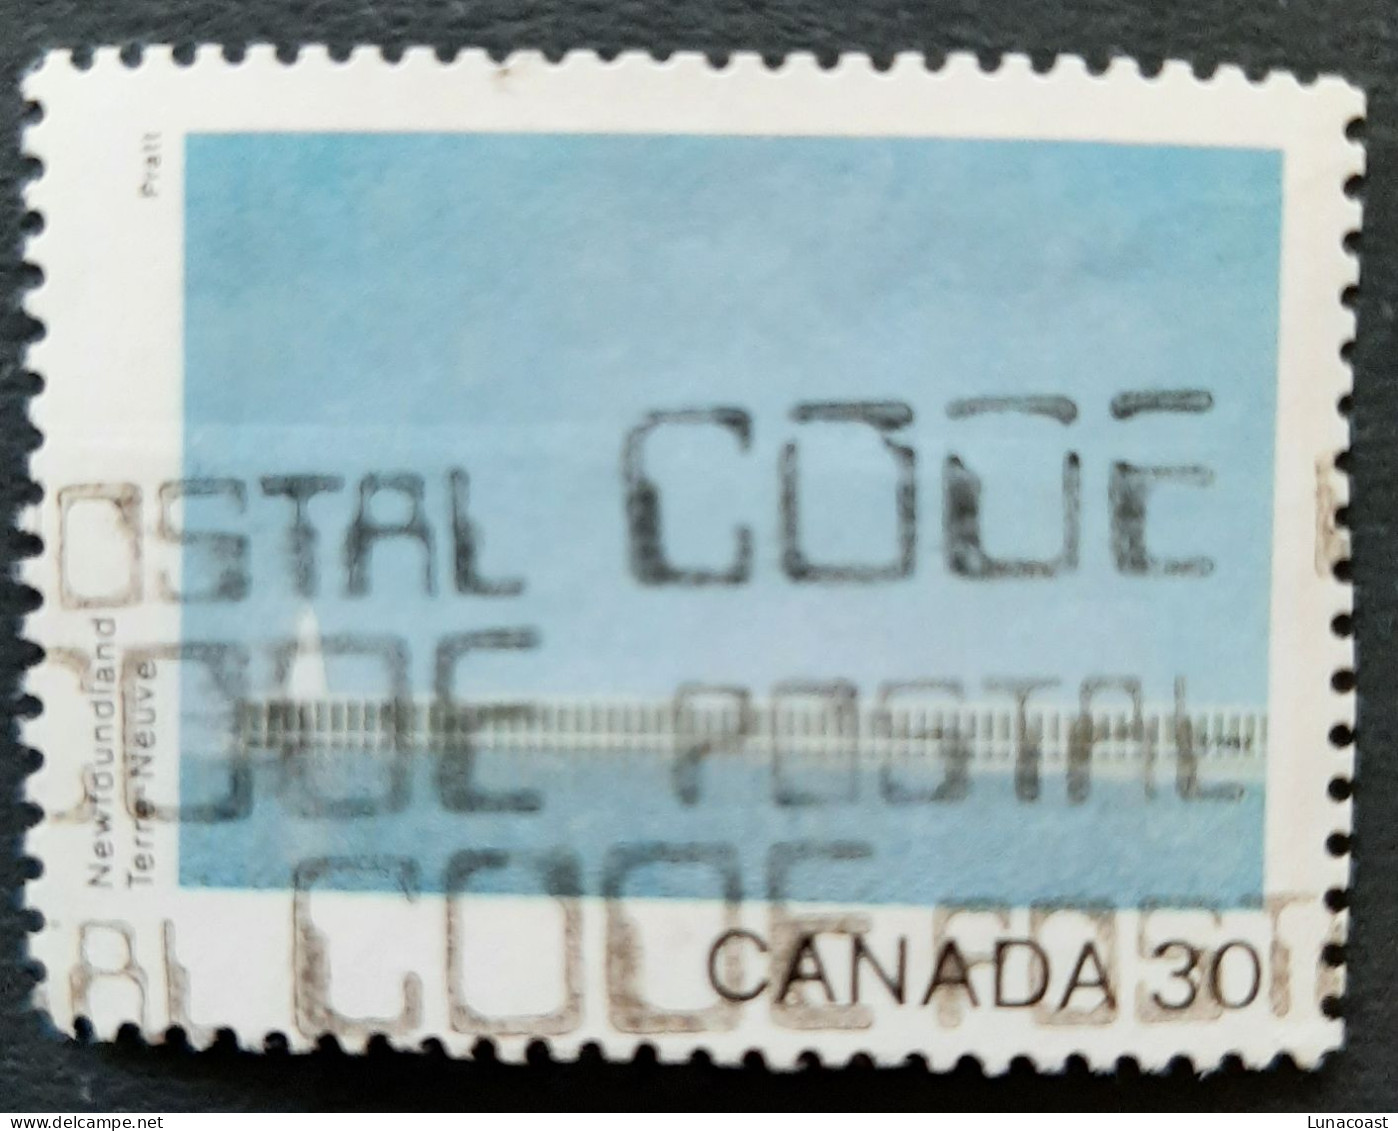 Canada 1982  USED  Sc957,  30c Canada Day, Newfoundland - Used Stamps